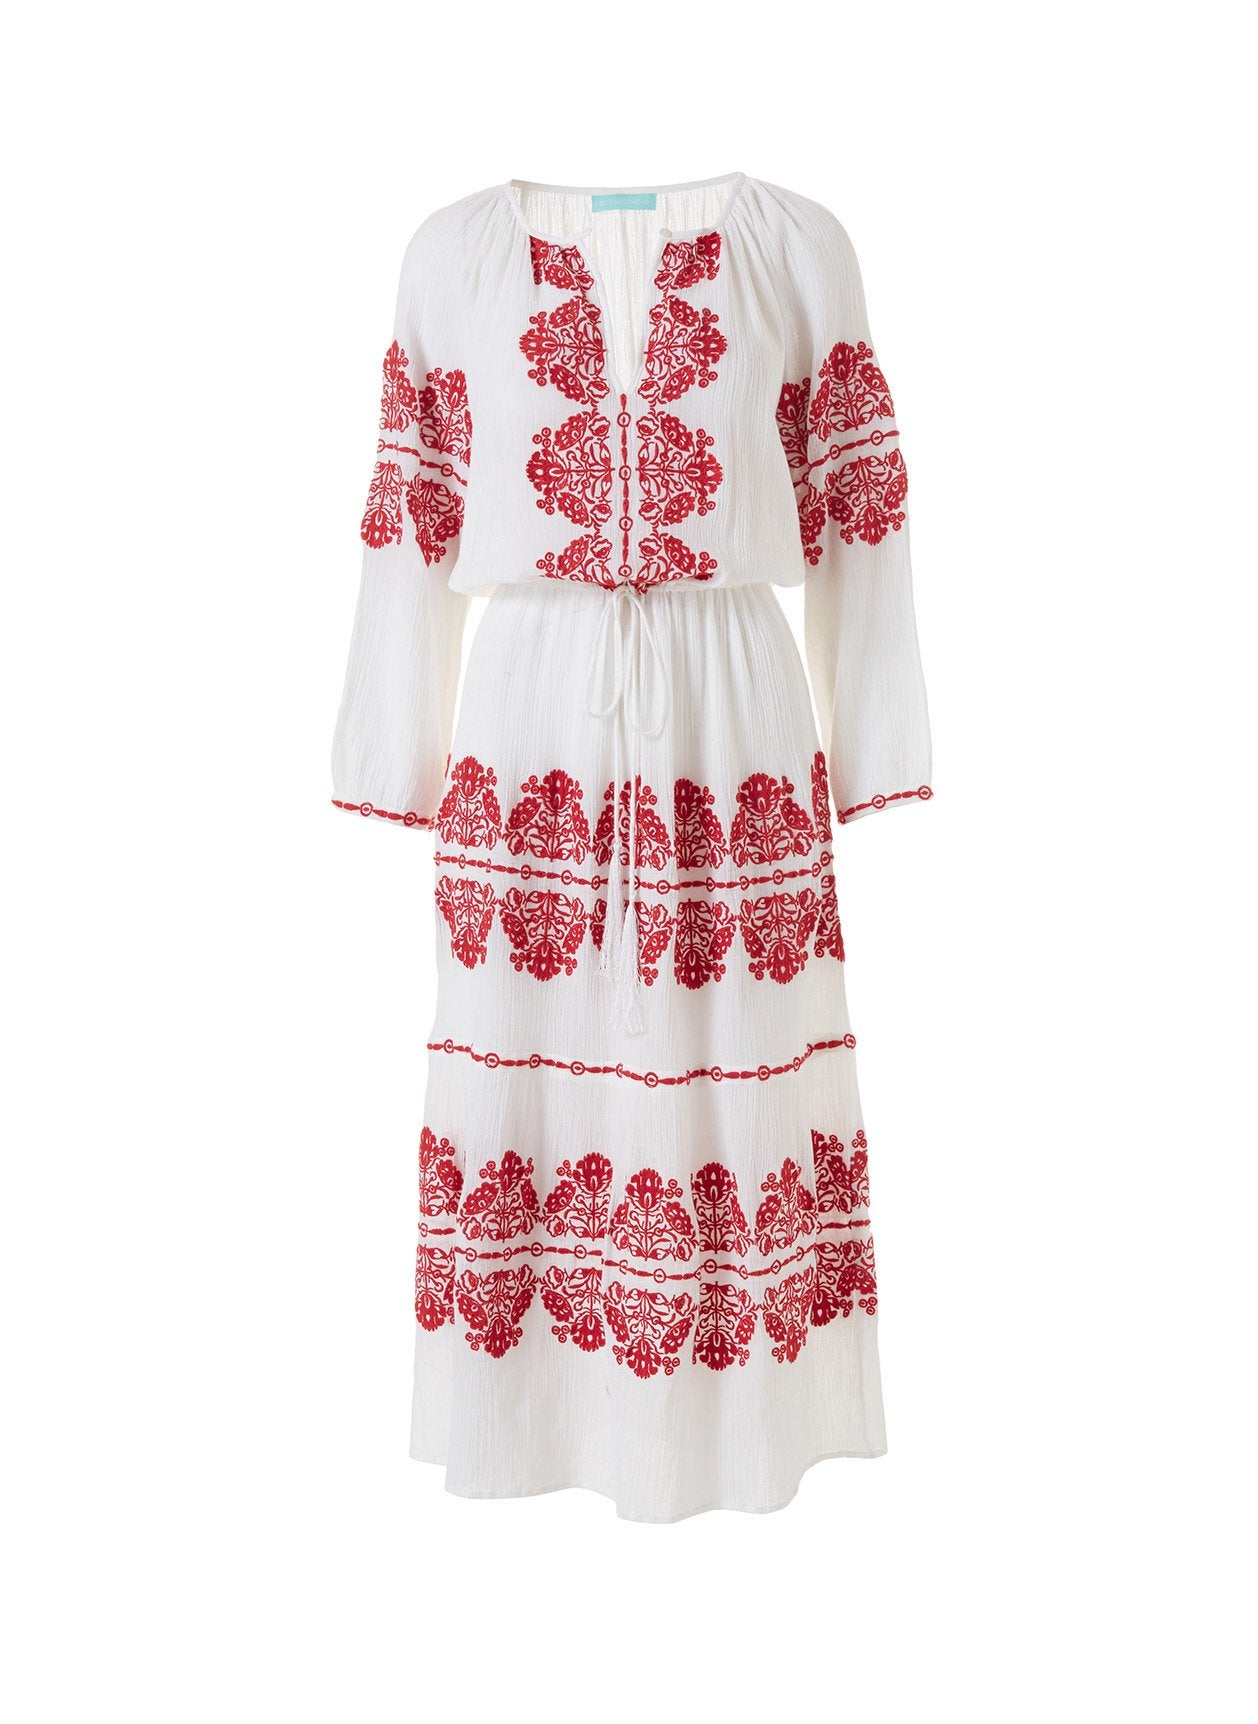 white and red embroidered dress